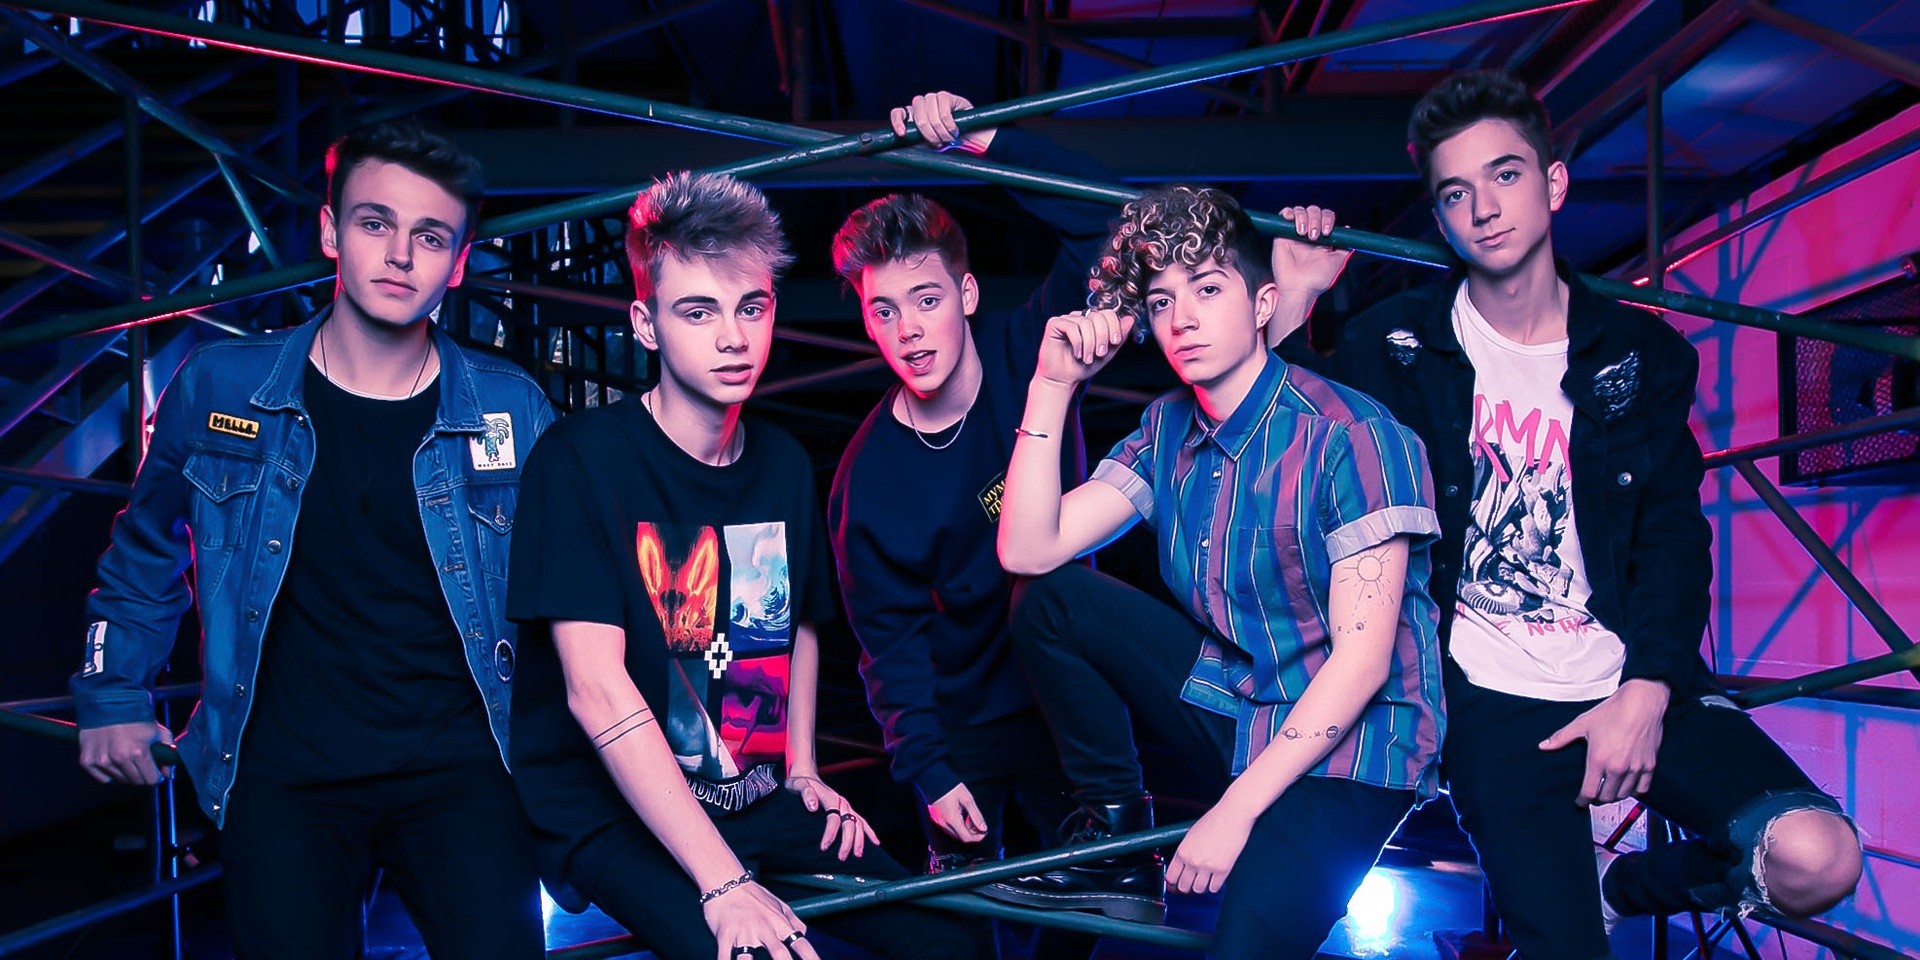 Dance pop group Why Don't We to perform in Singapore